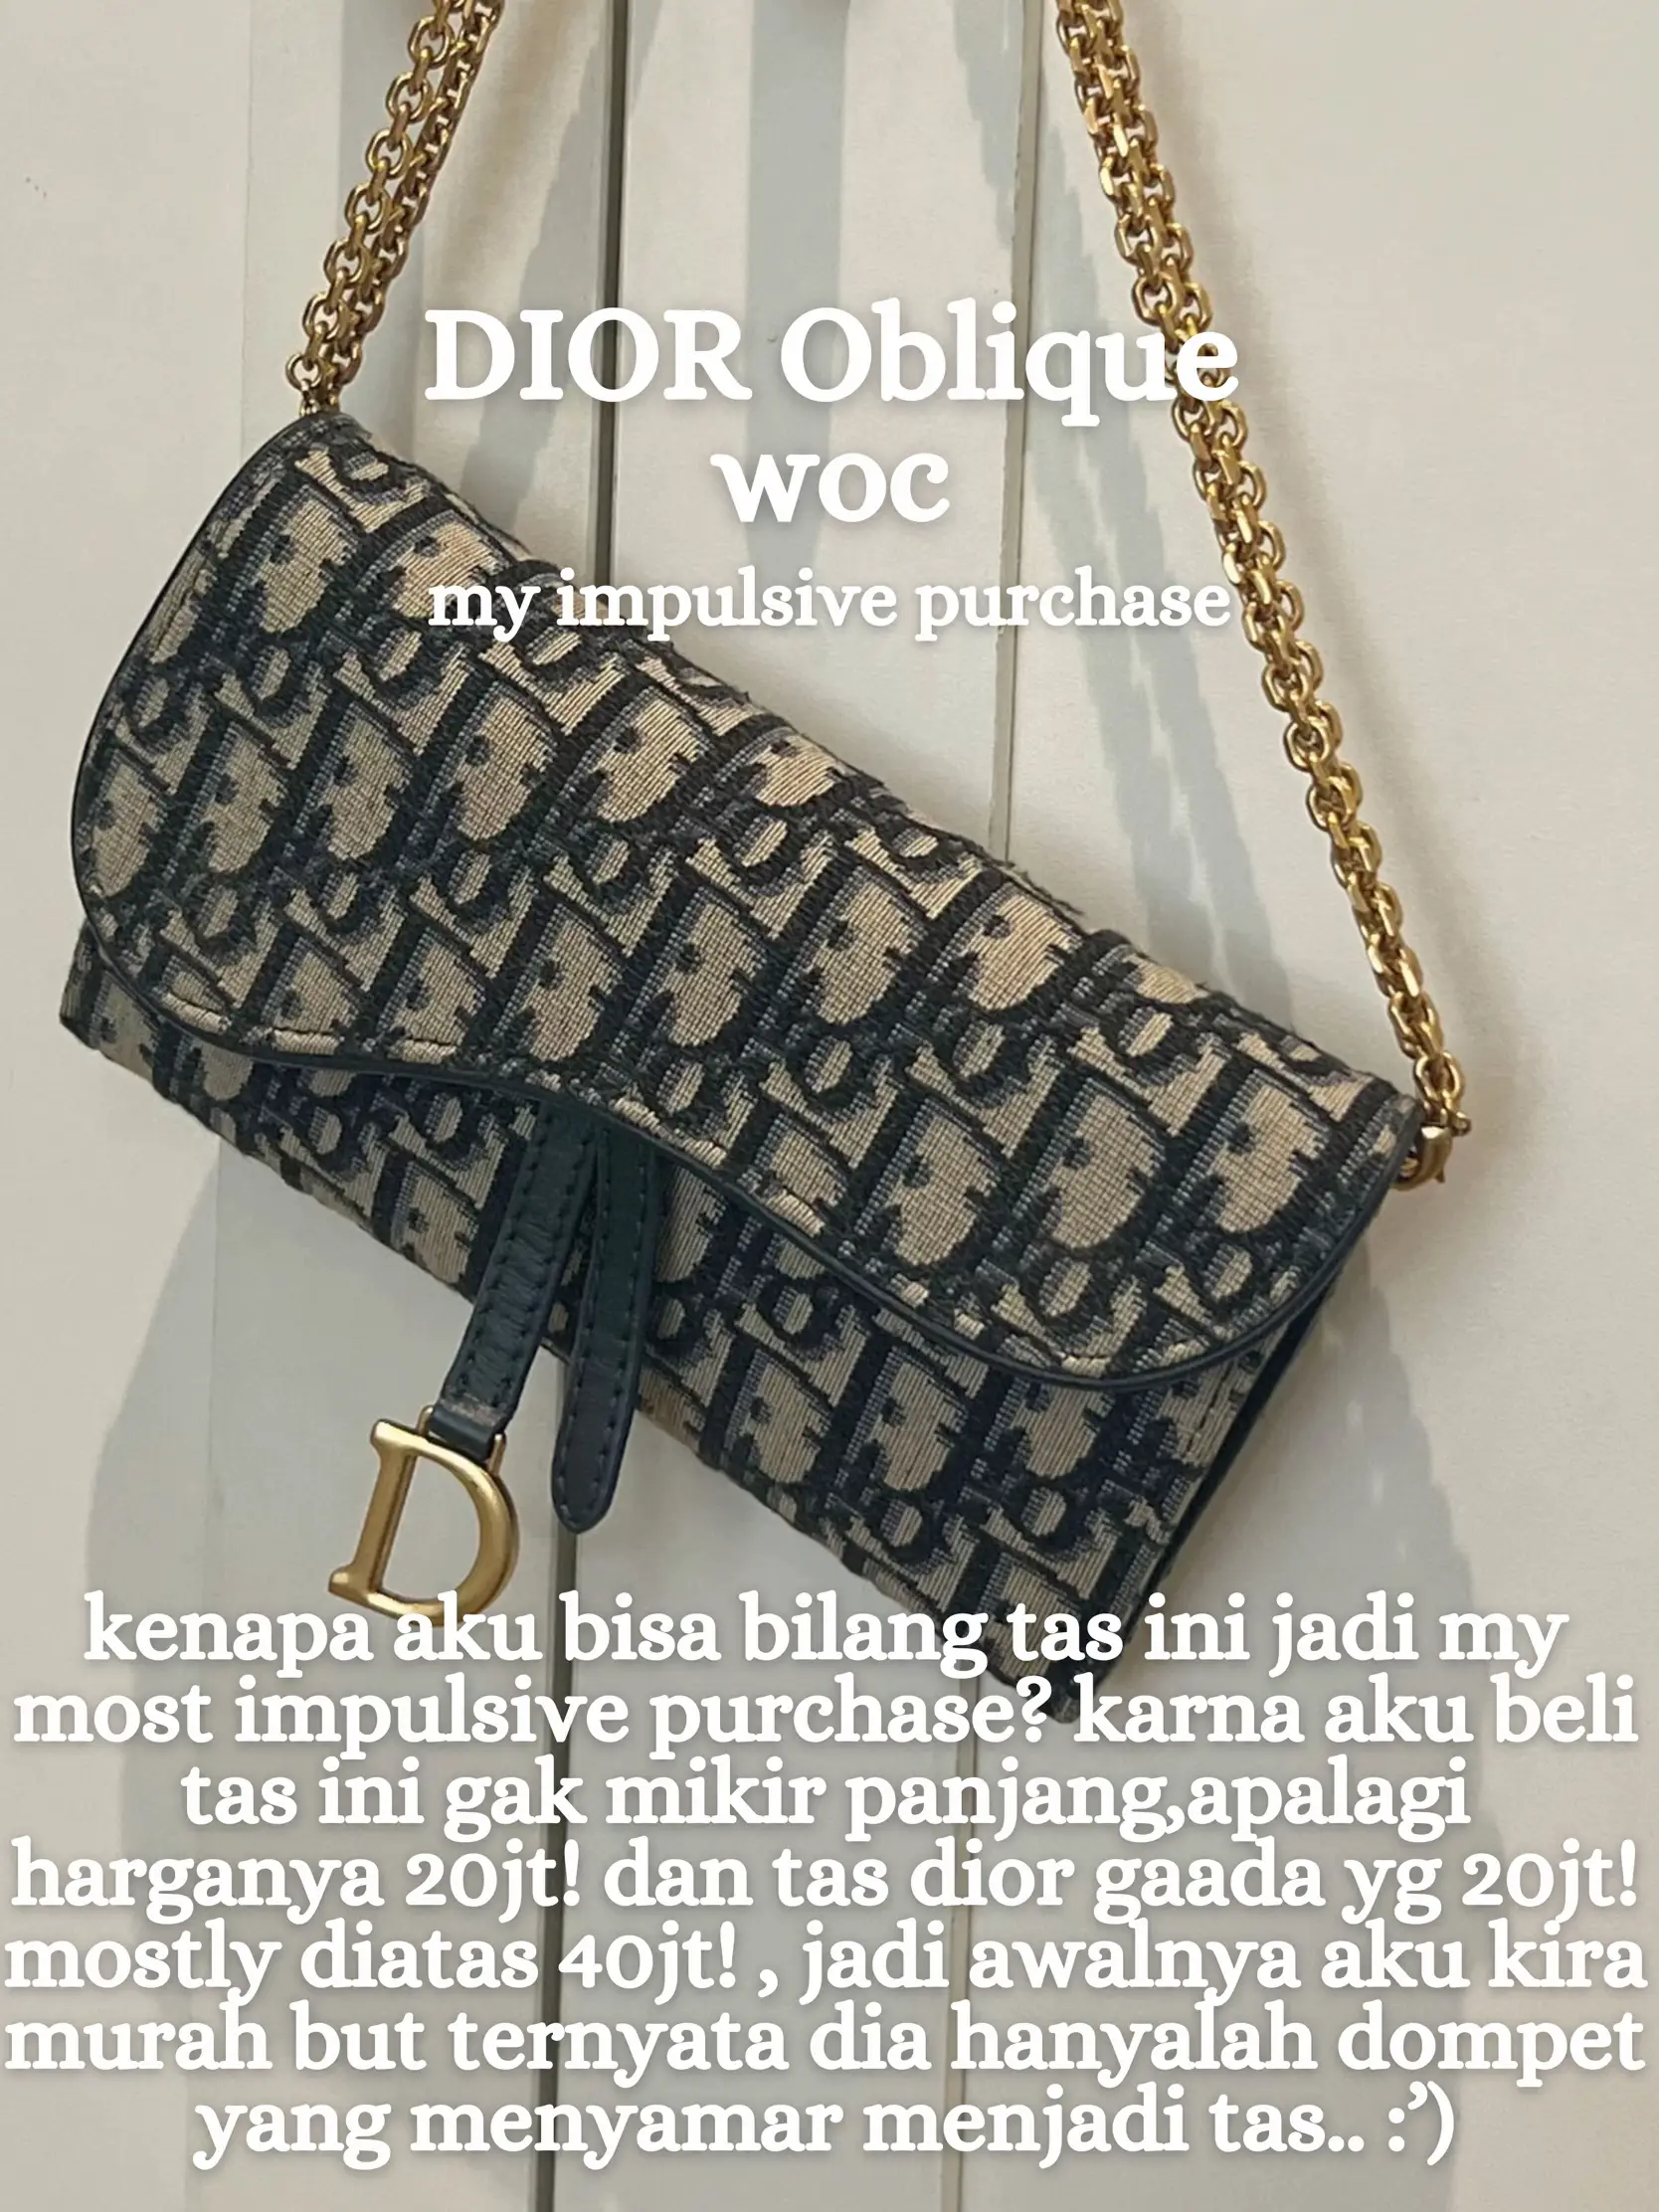 Take a look FLP bag with me💼, Gallery posted by dxdaa